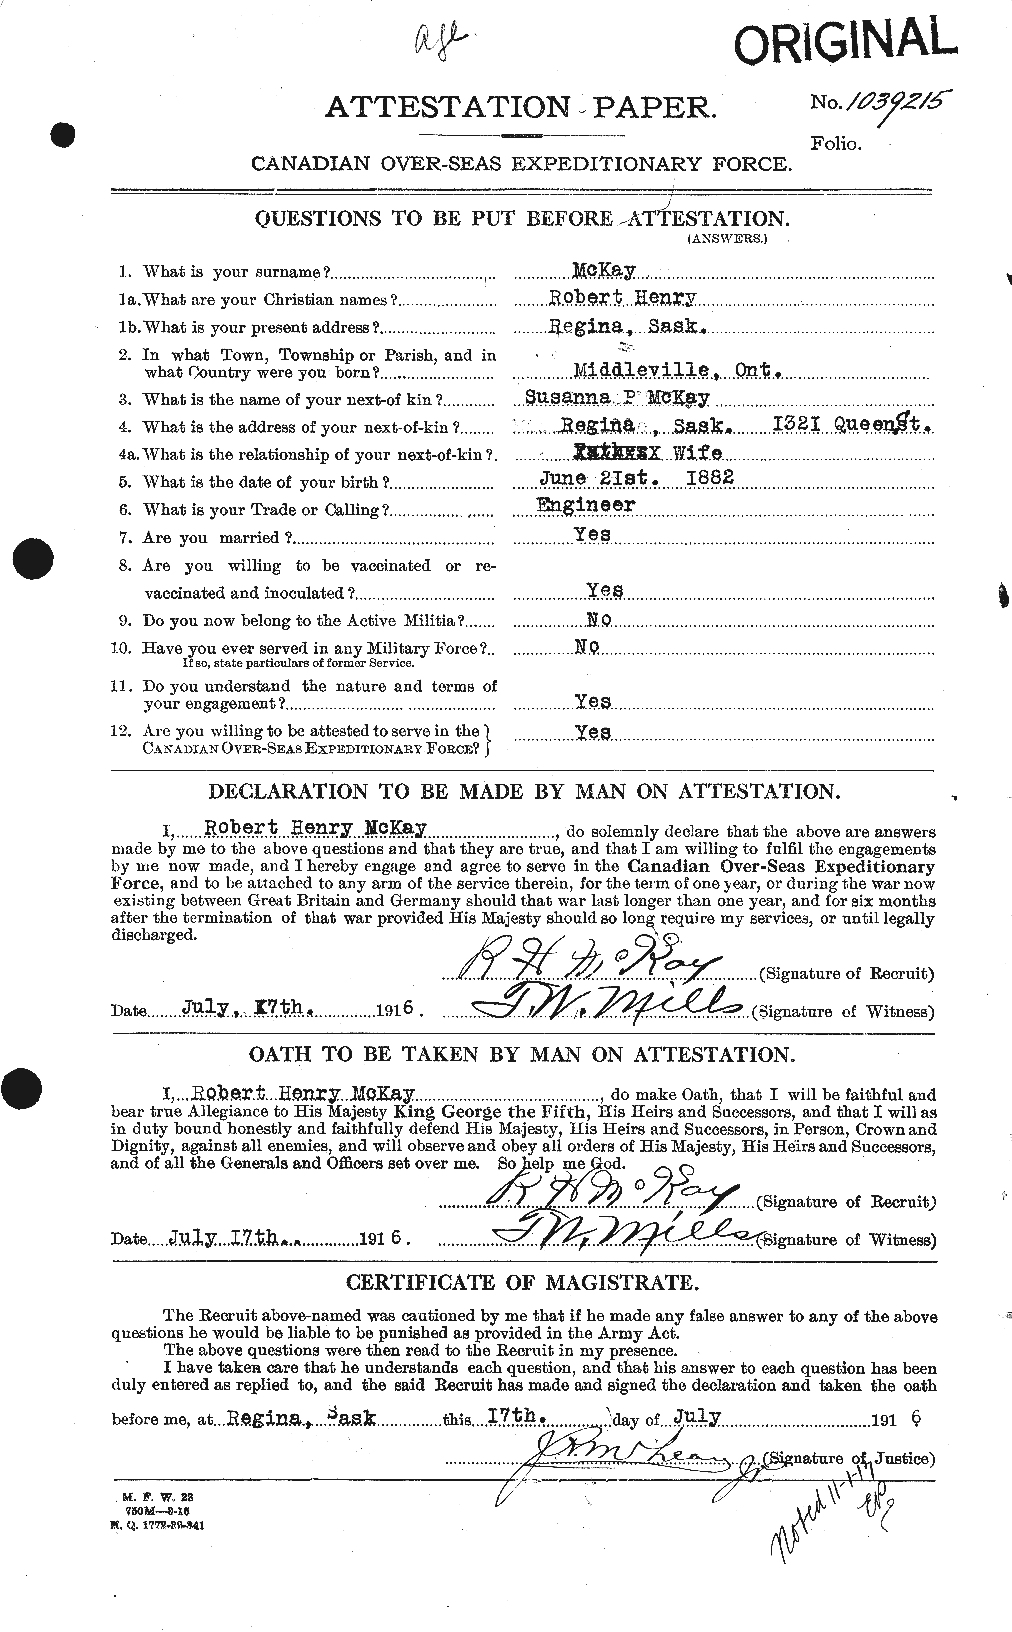 Personnel Records of the First World War - CEF 530097a